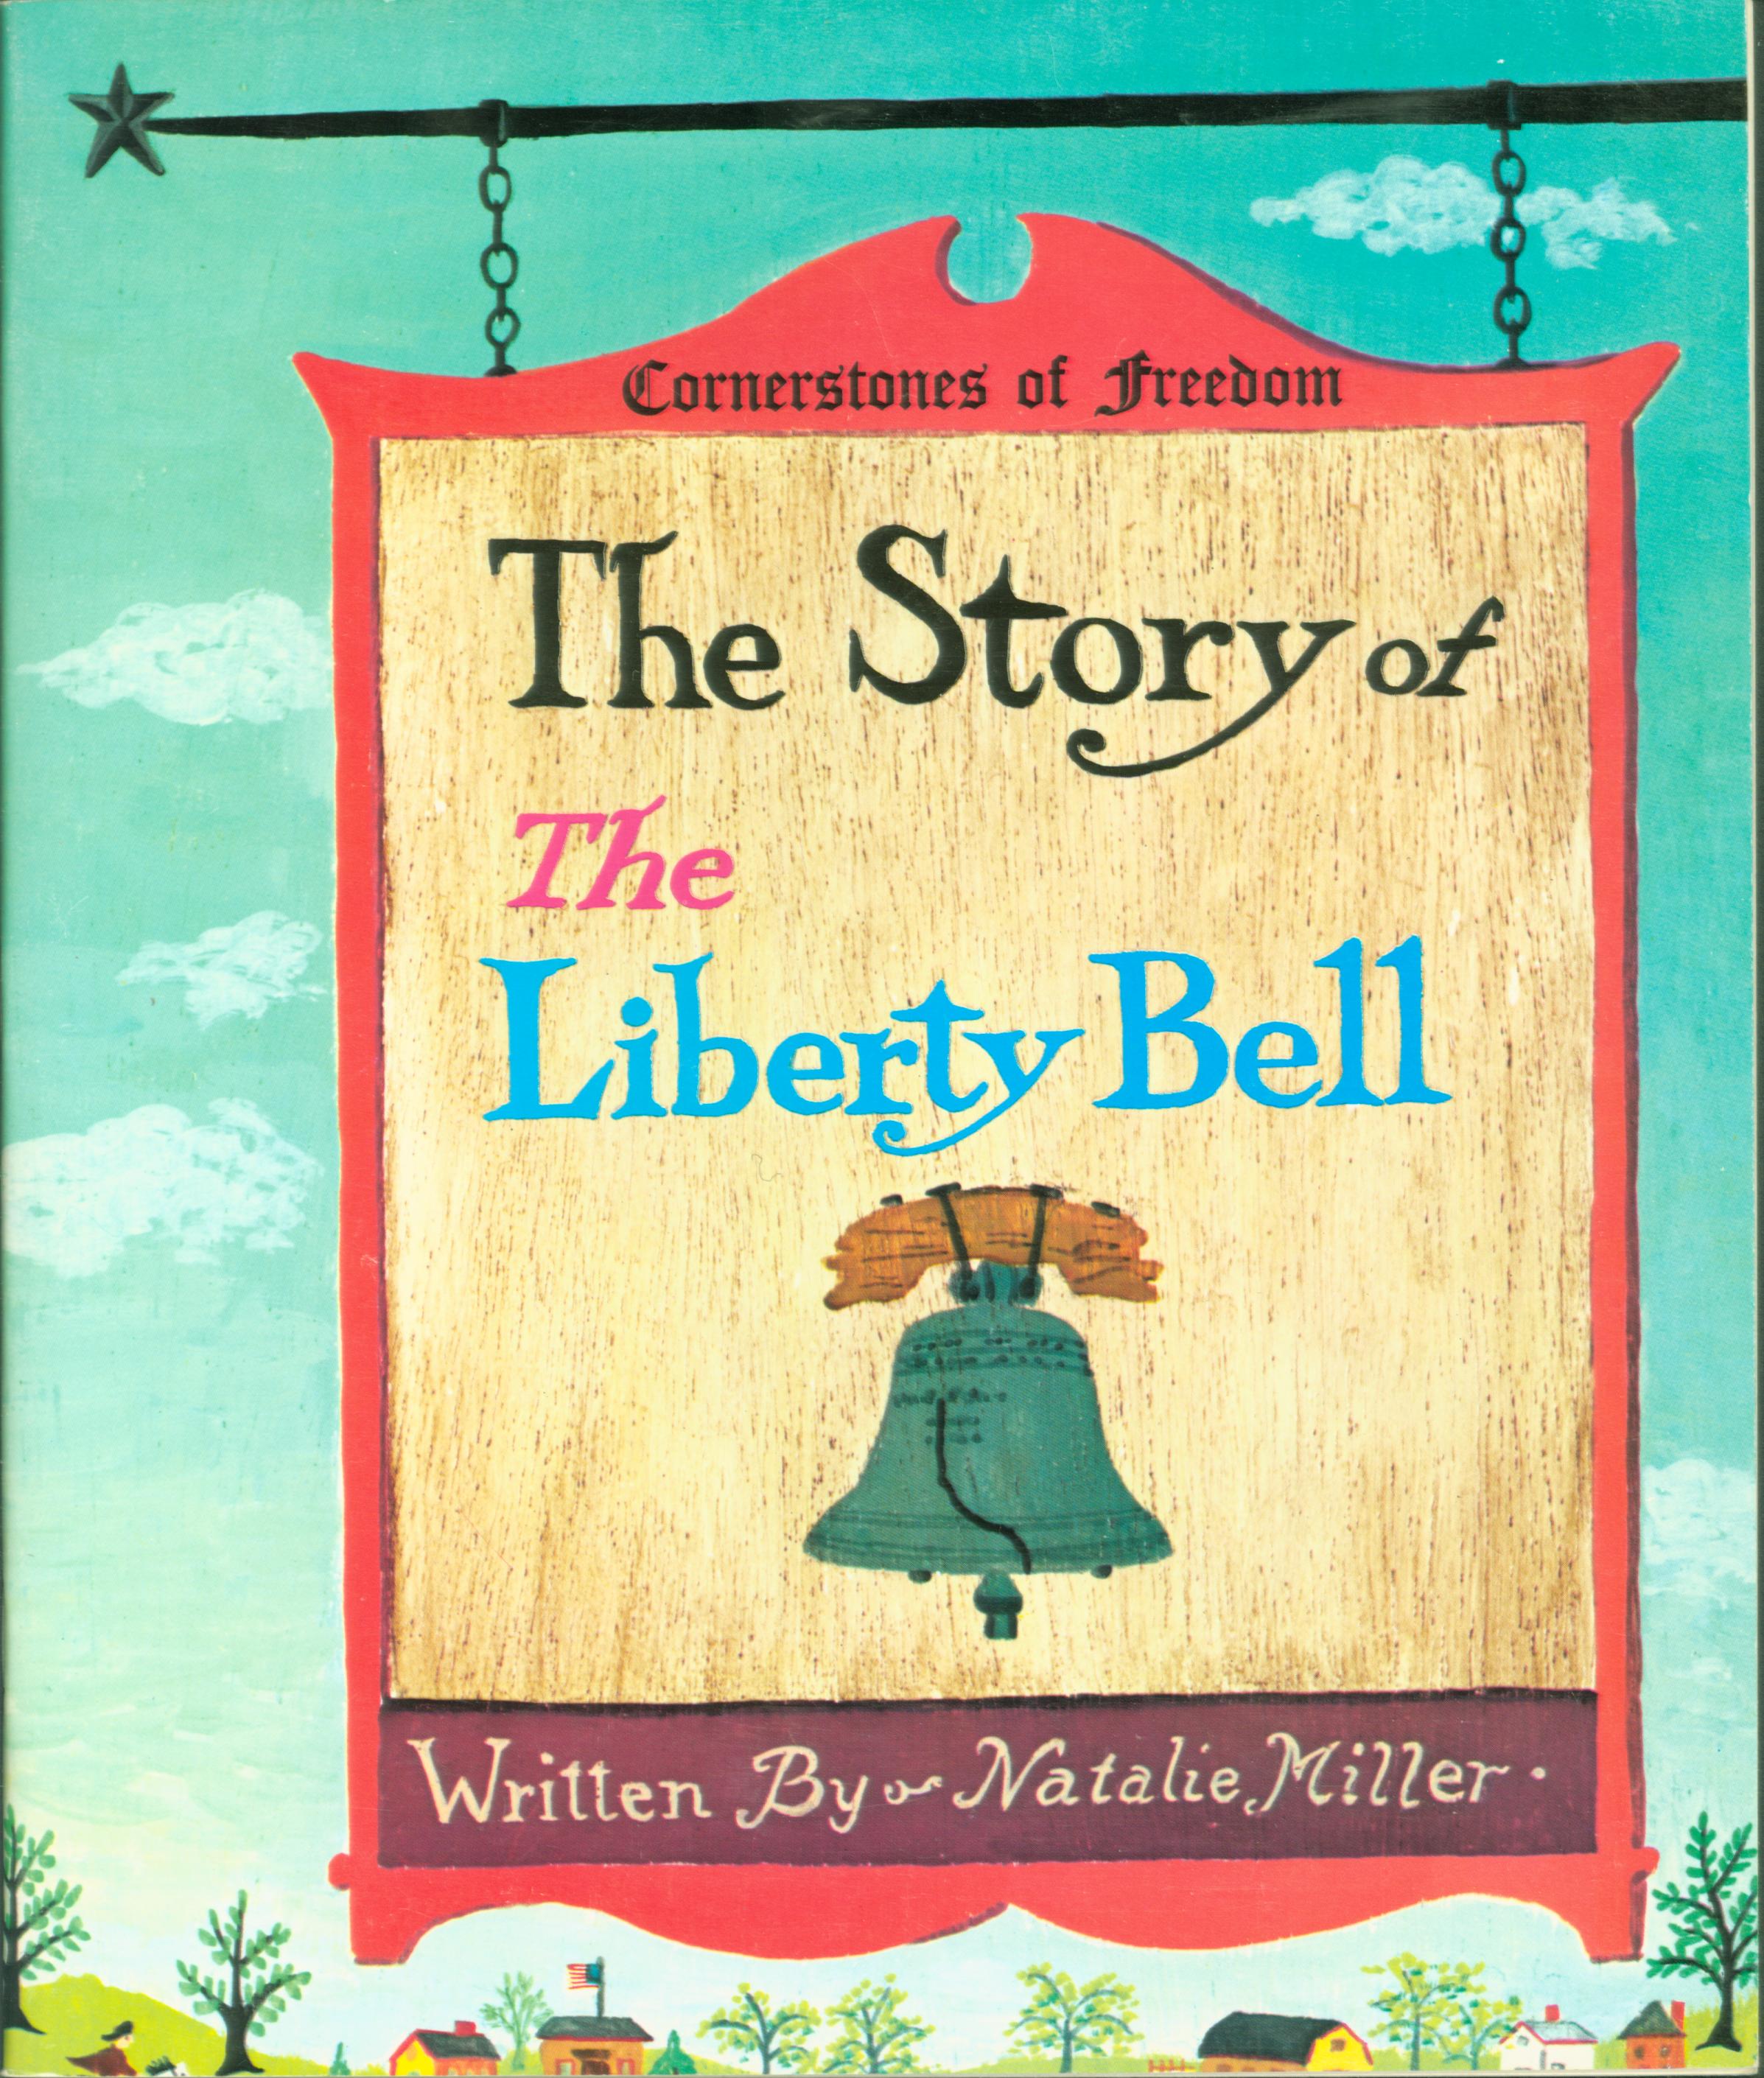 THE STORY OF THE LIBERTY BELL